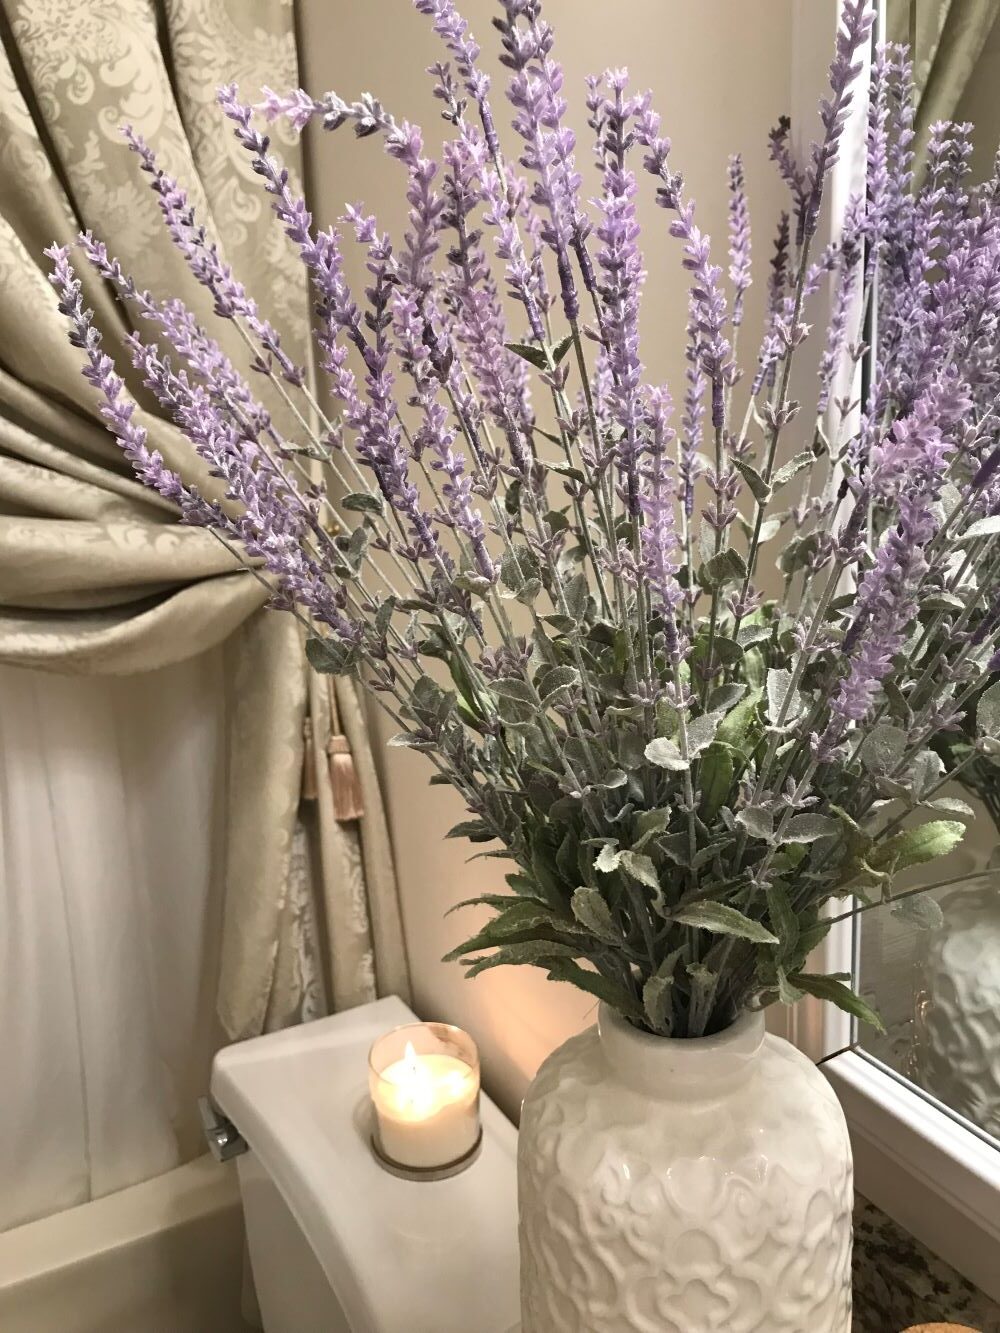 lavender bouquet in white vase on countertop for spring decor